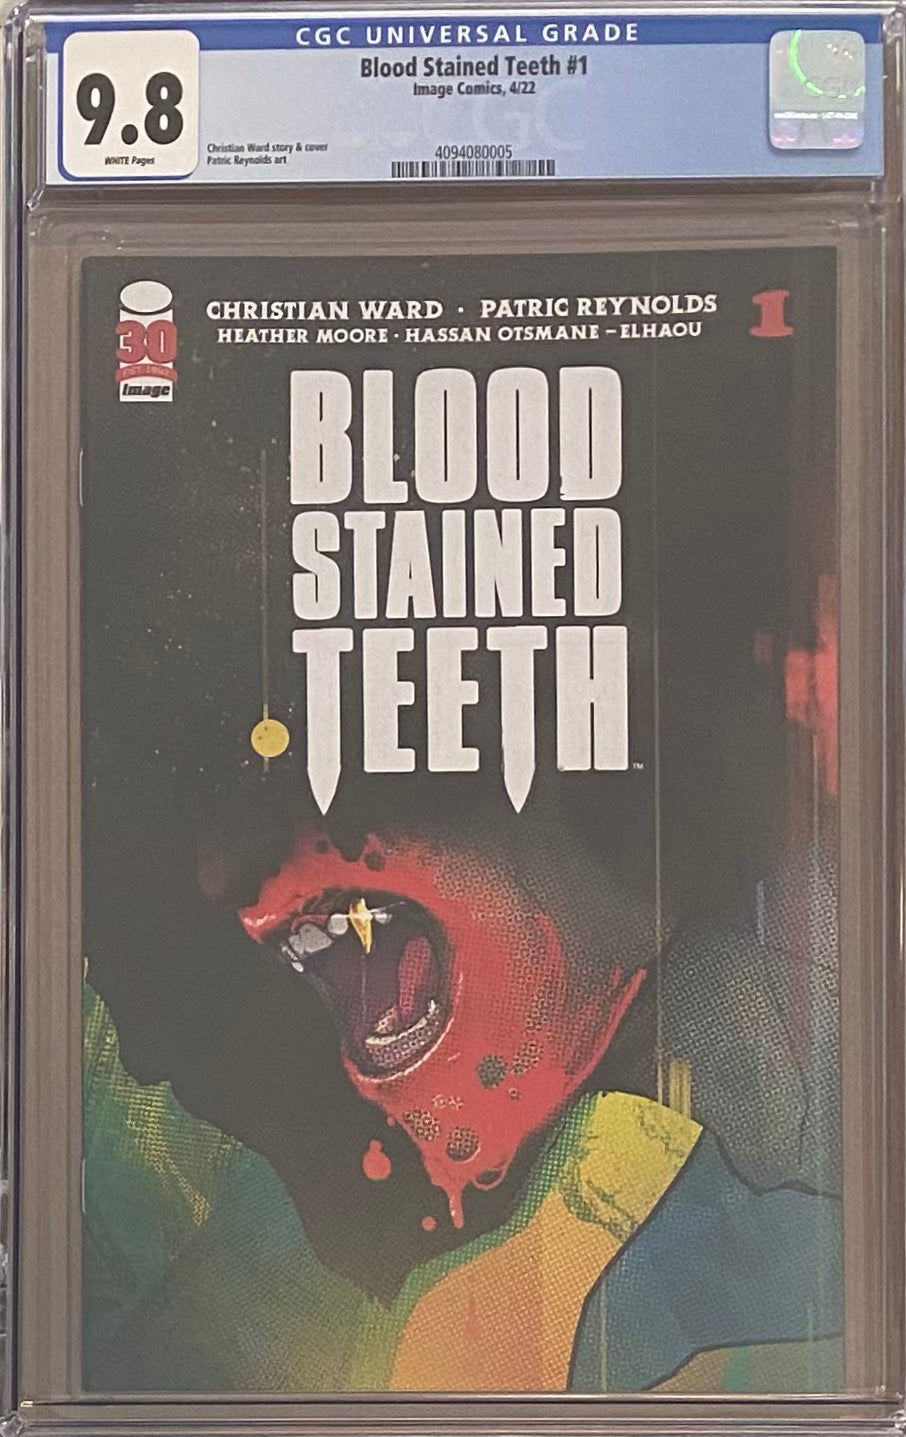 Blood Stained Teeth #1 CGC 9.8